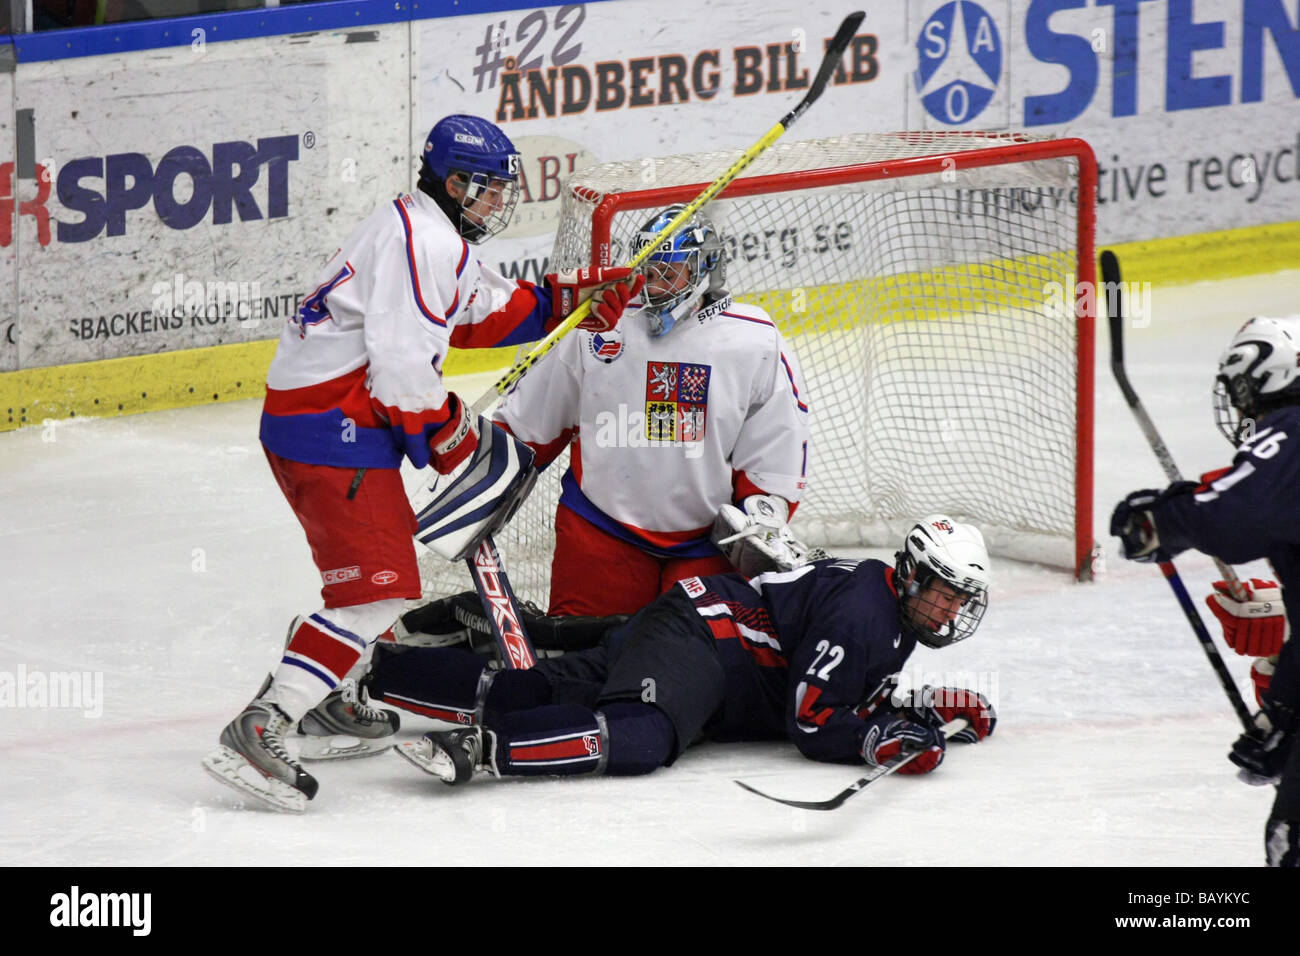 US player no 22 Chris McCarthy lying on the ice. The Czech goalkeeper is no 1 Petr Mrázek. Stock Photo